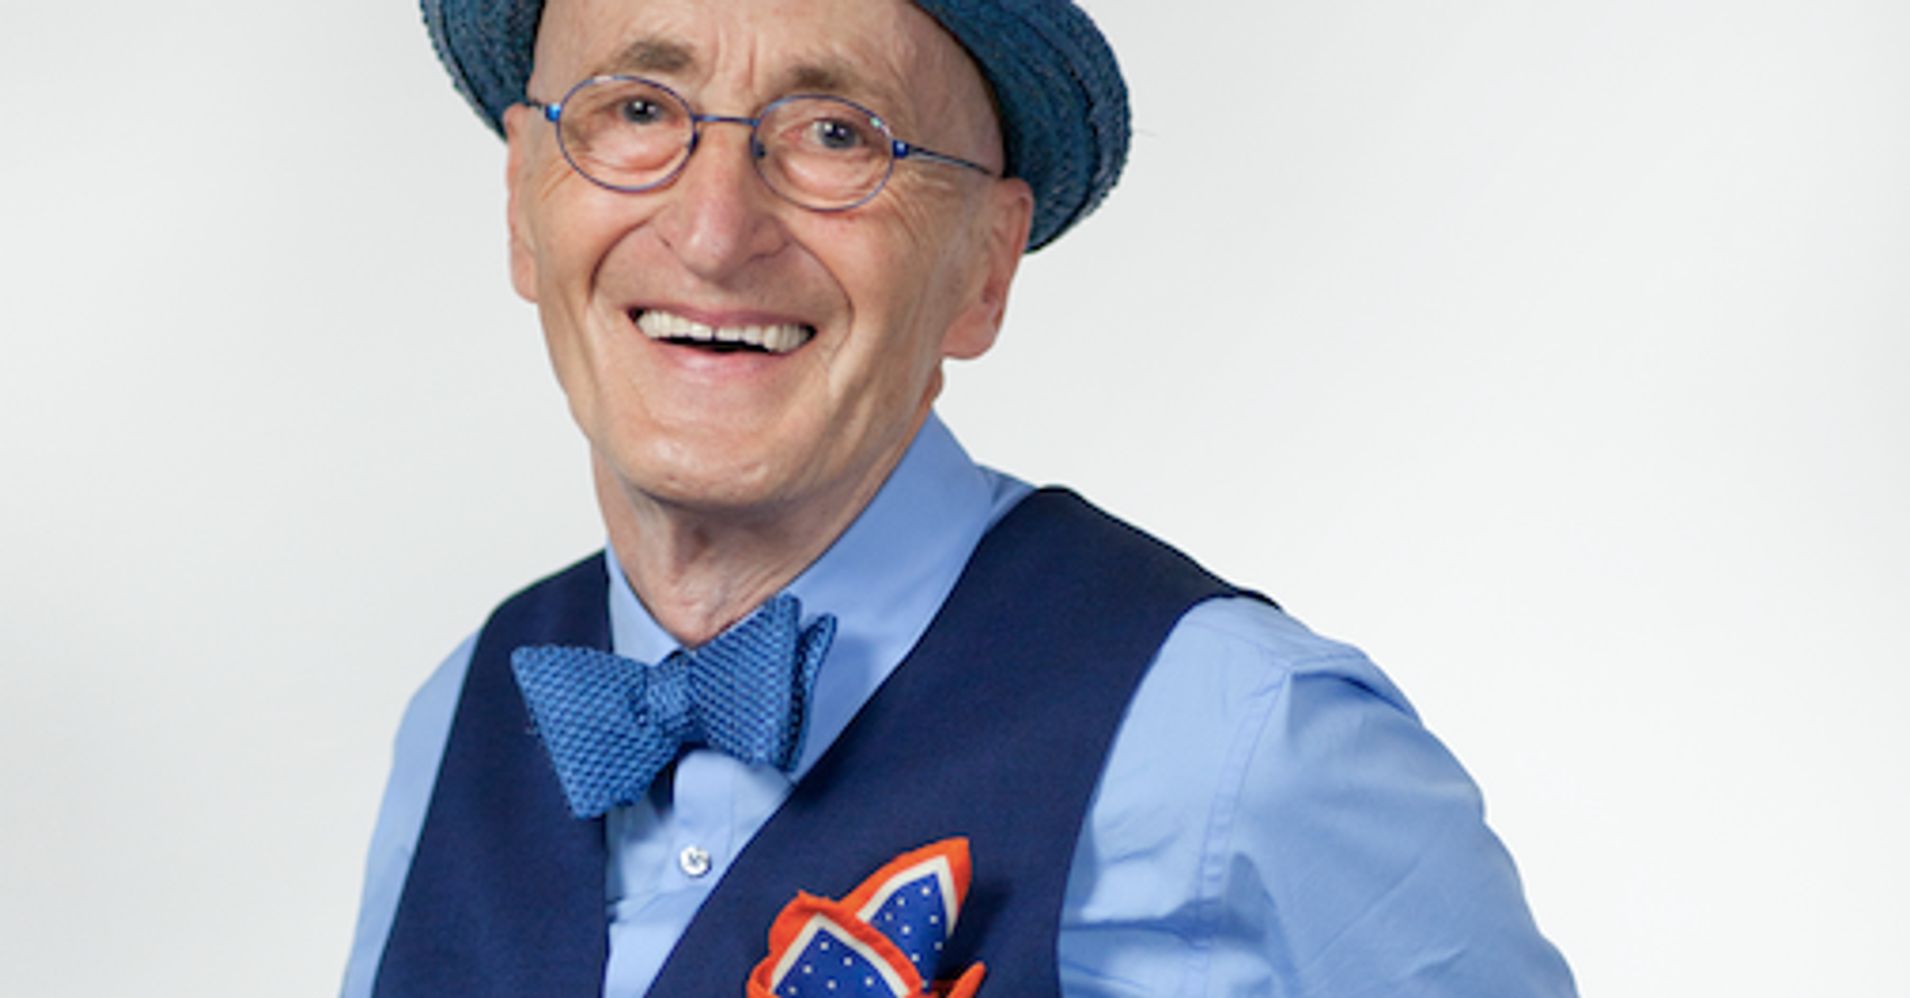 This Stylish Hipster Grandpa Is Way Cooler Than All Of Us Huffpost